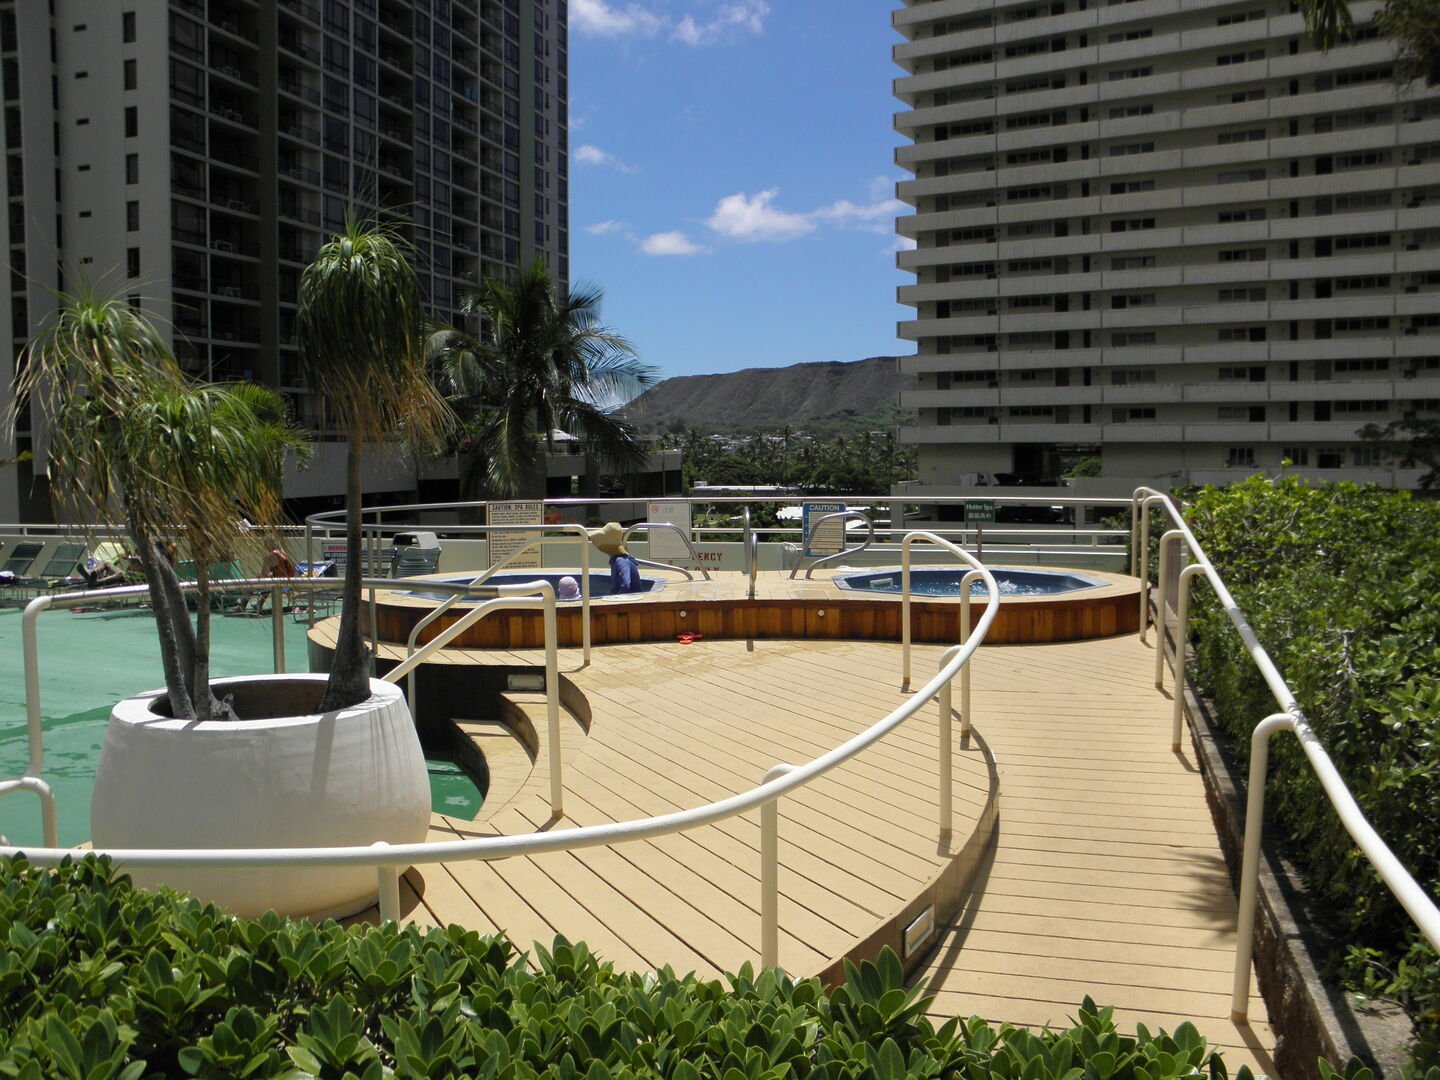 2 hot tubs next to the pool on the 6th floor